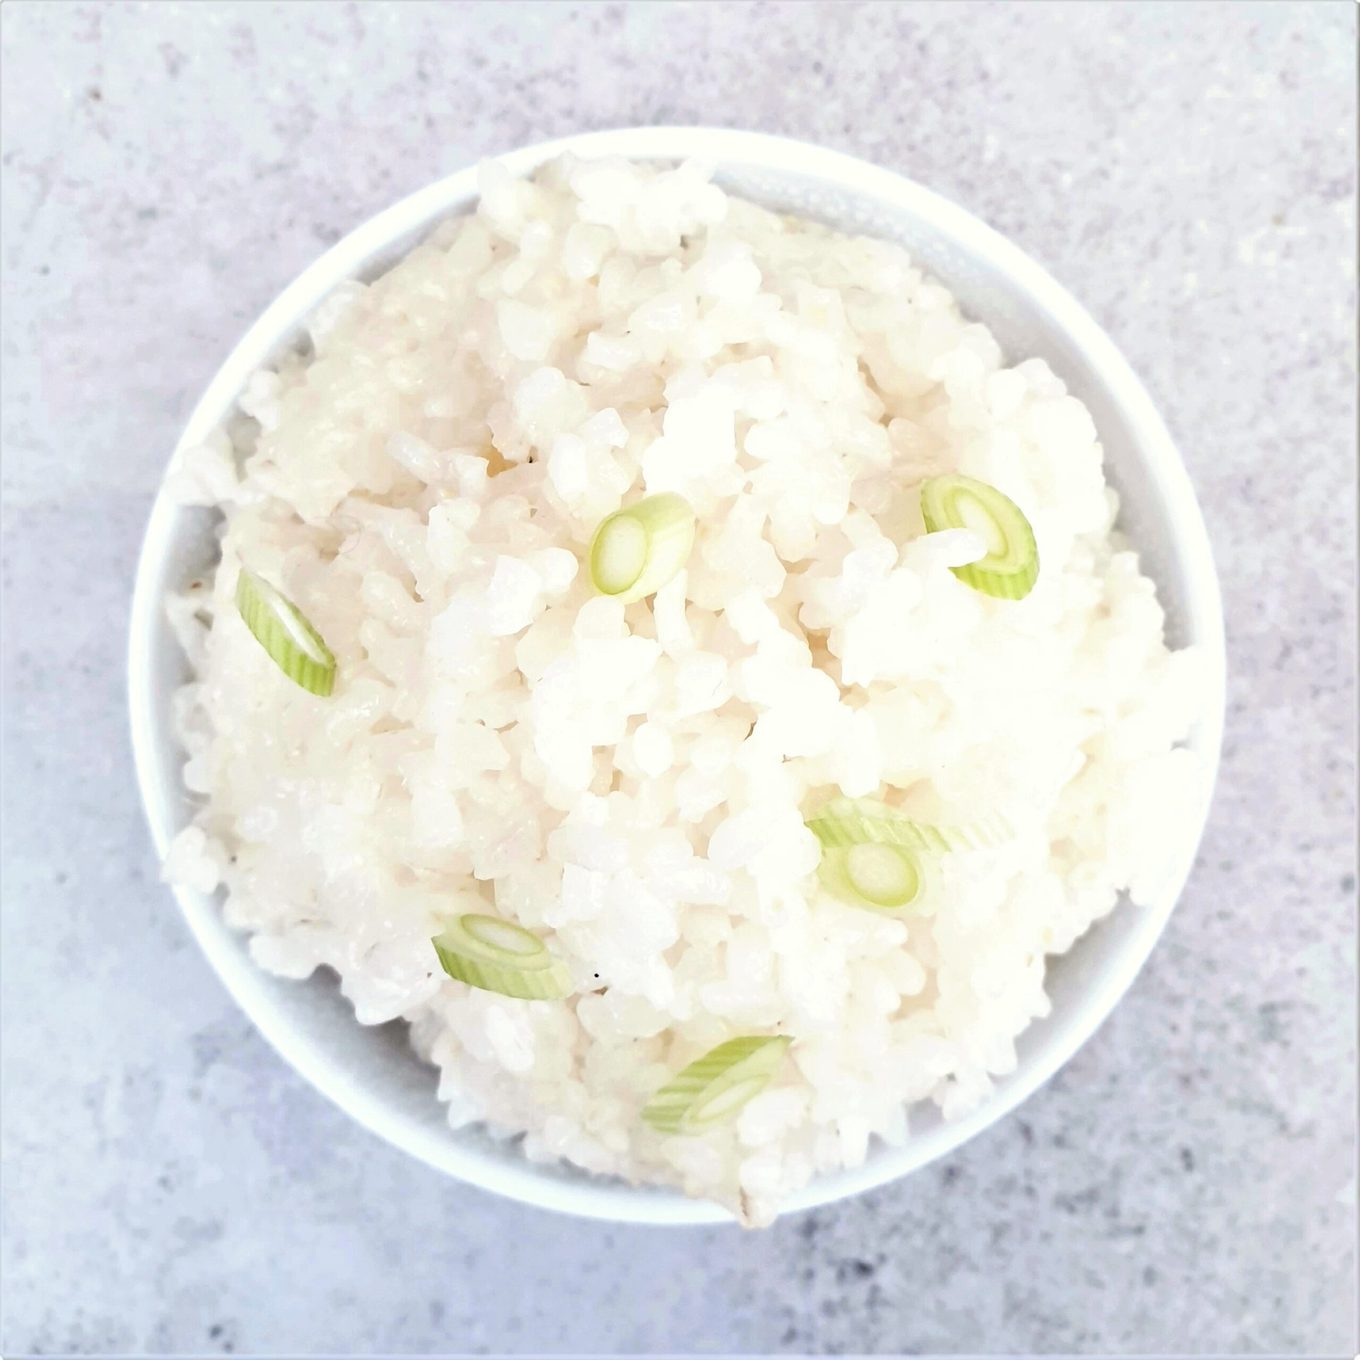 How To Cook Sticky Rice